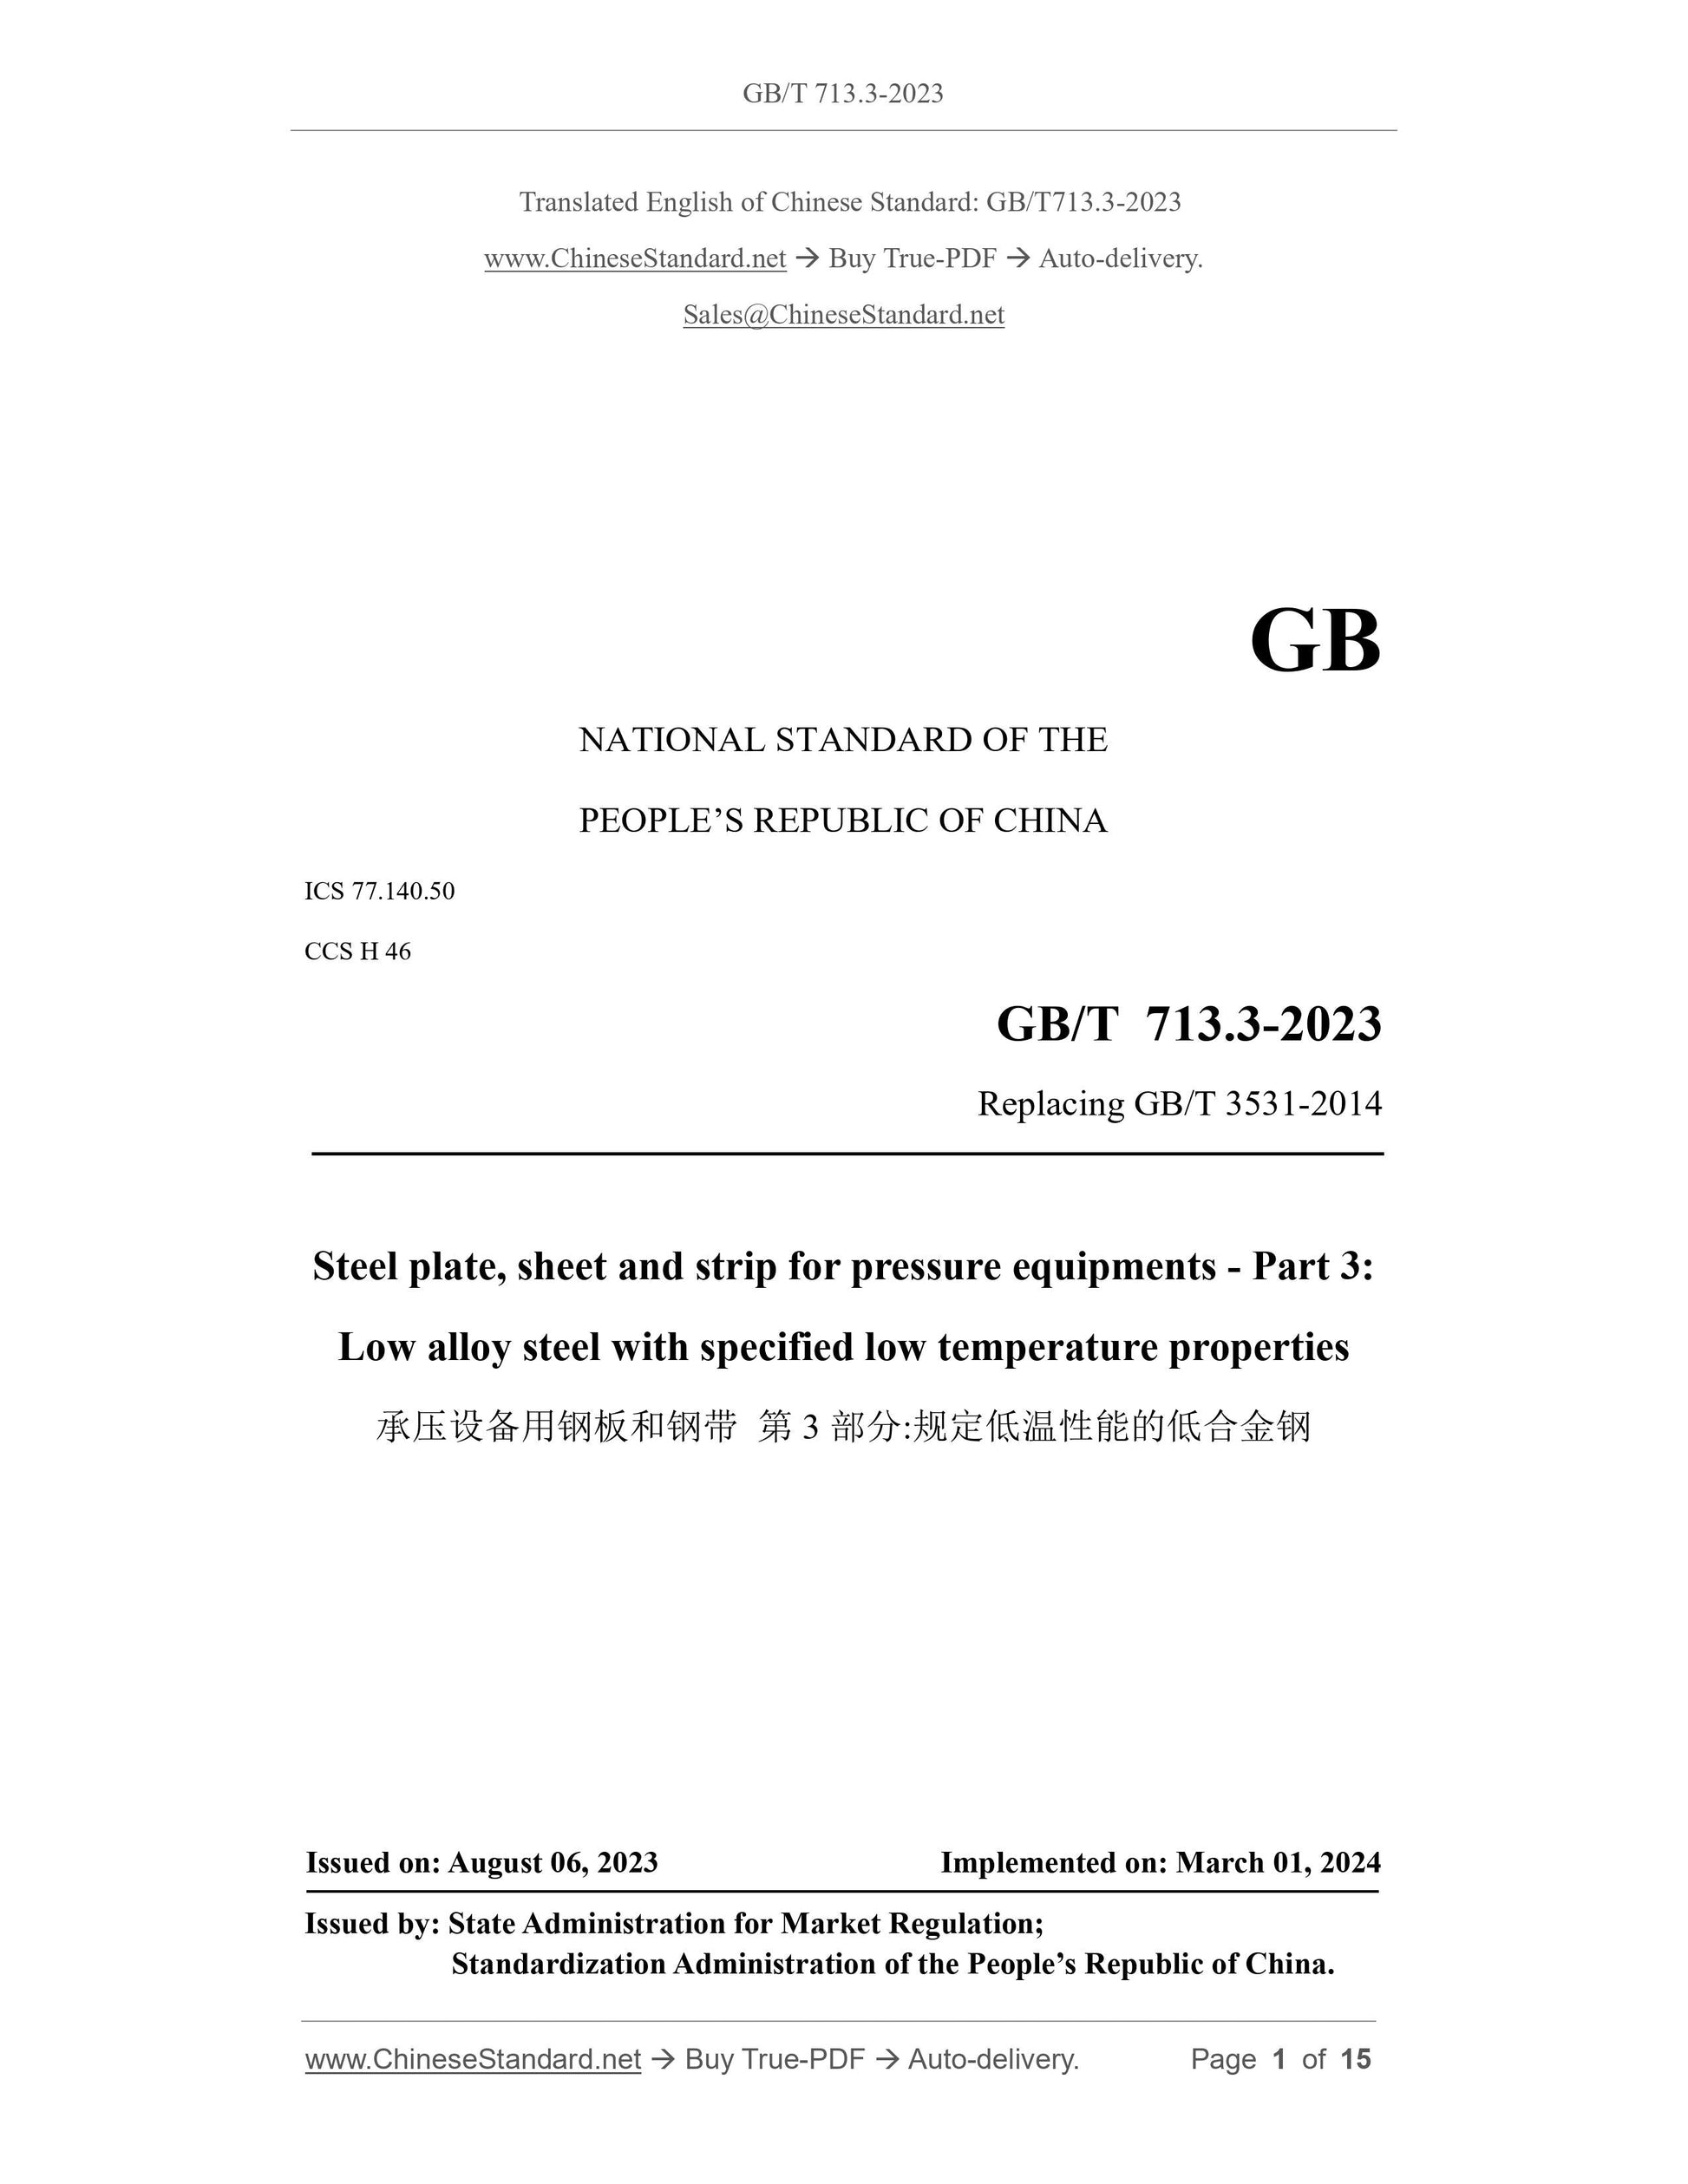 GB/T 713.3-2023 Page 1